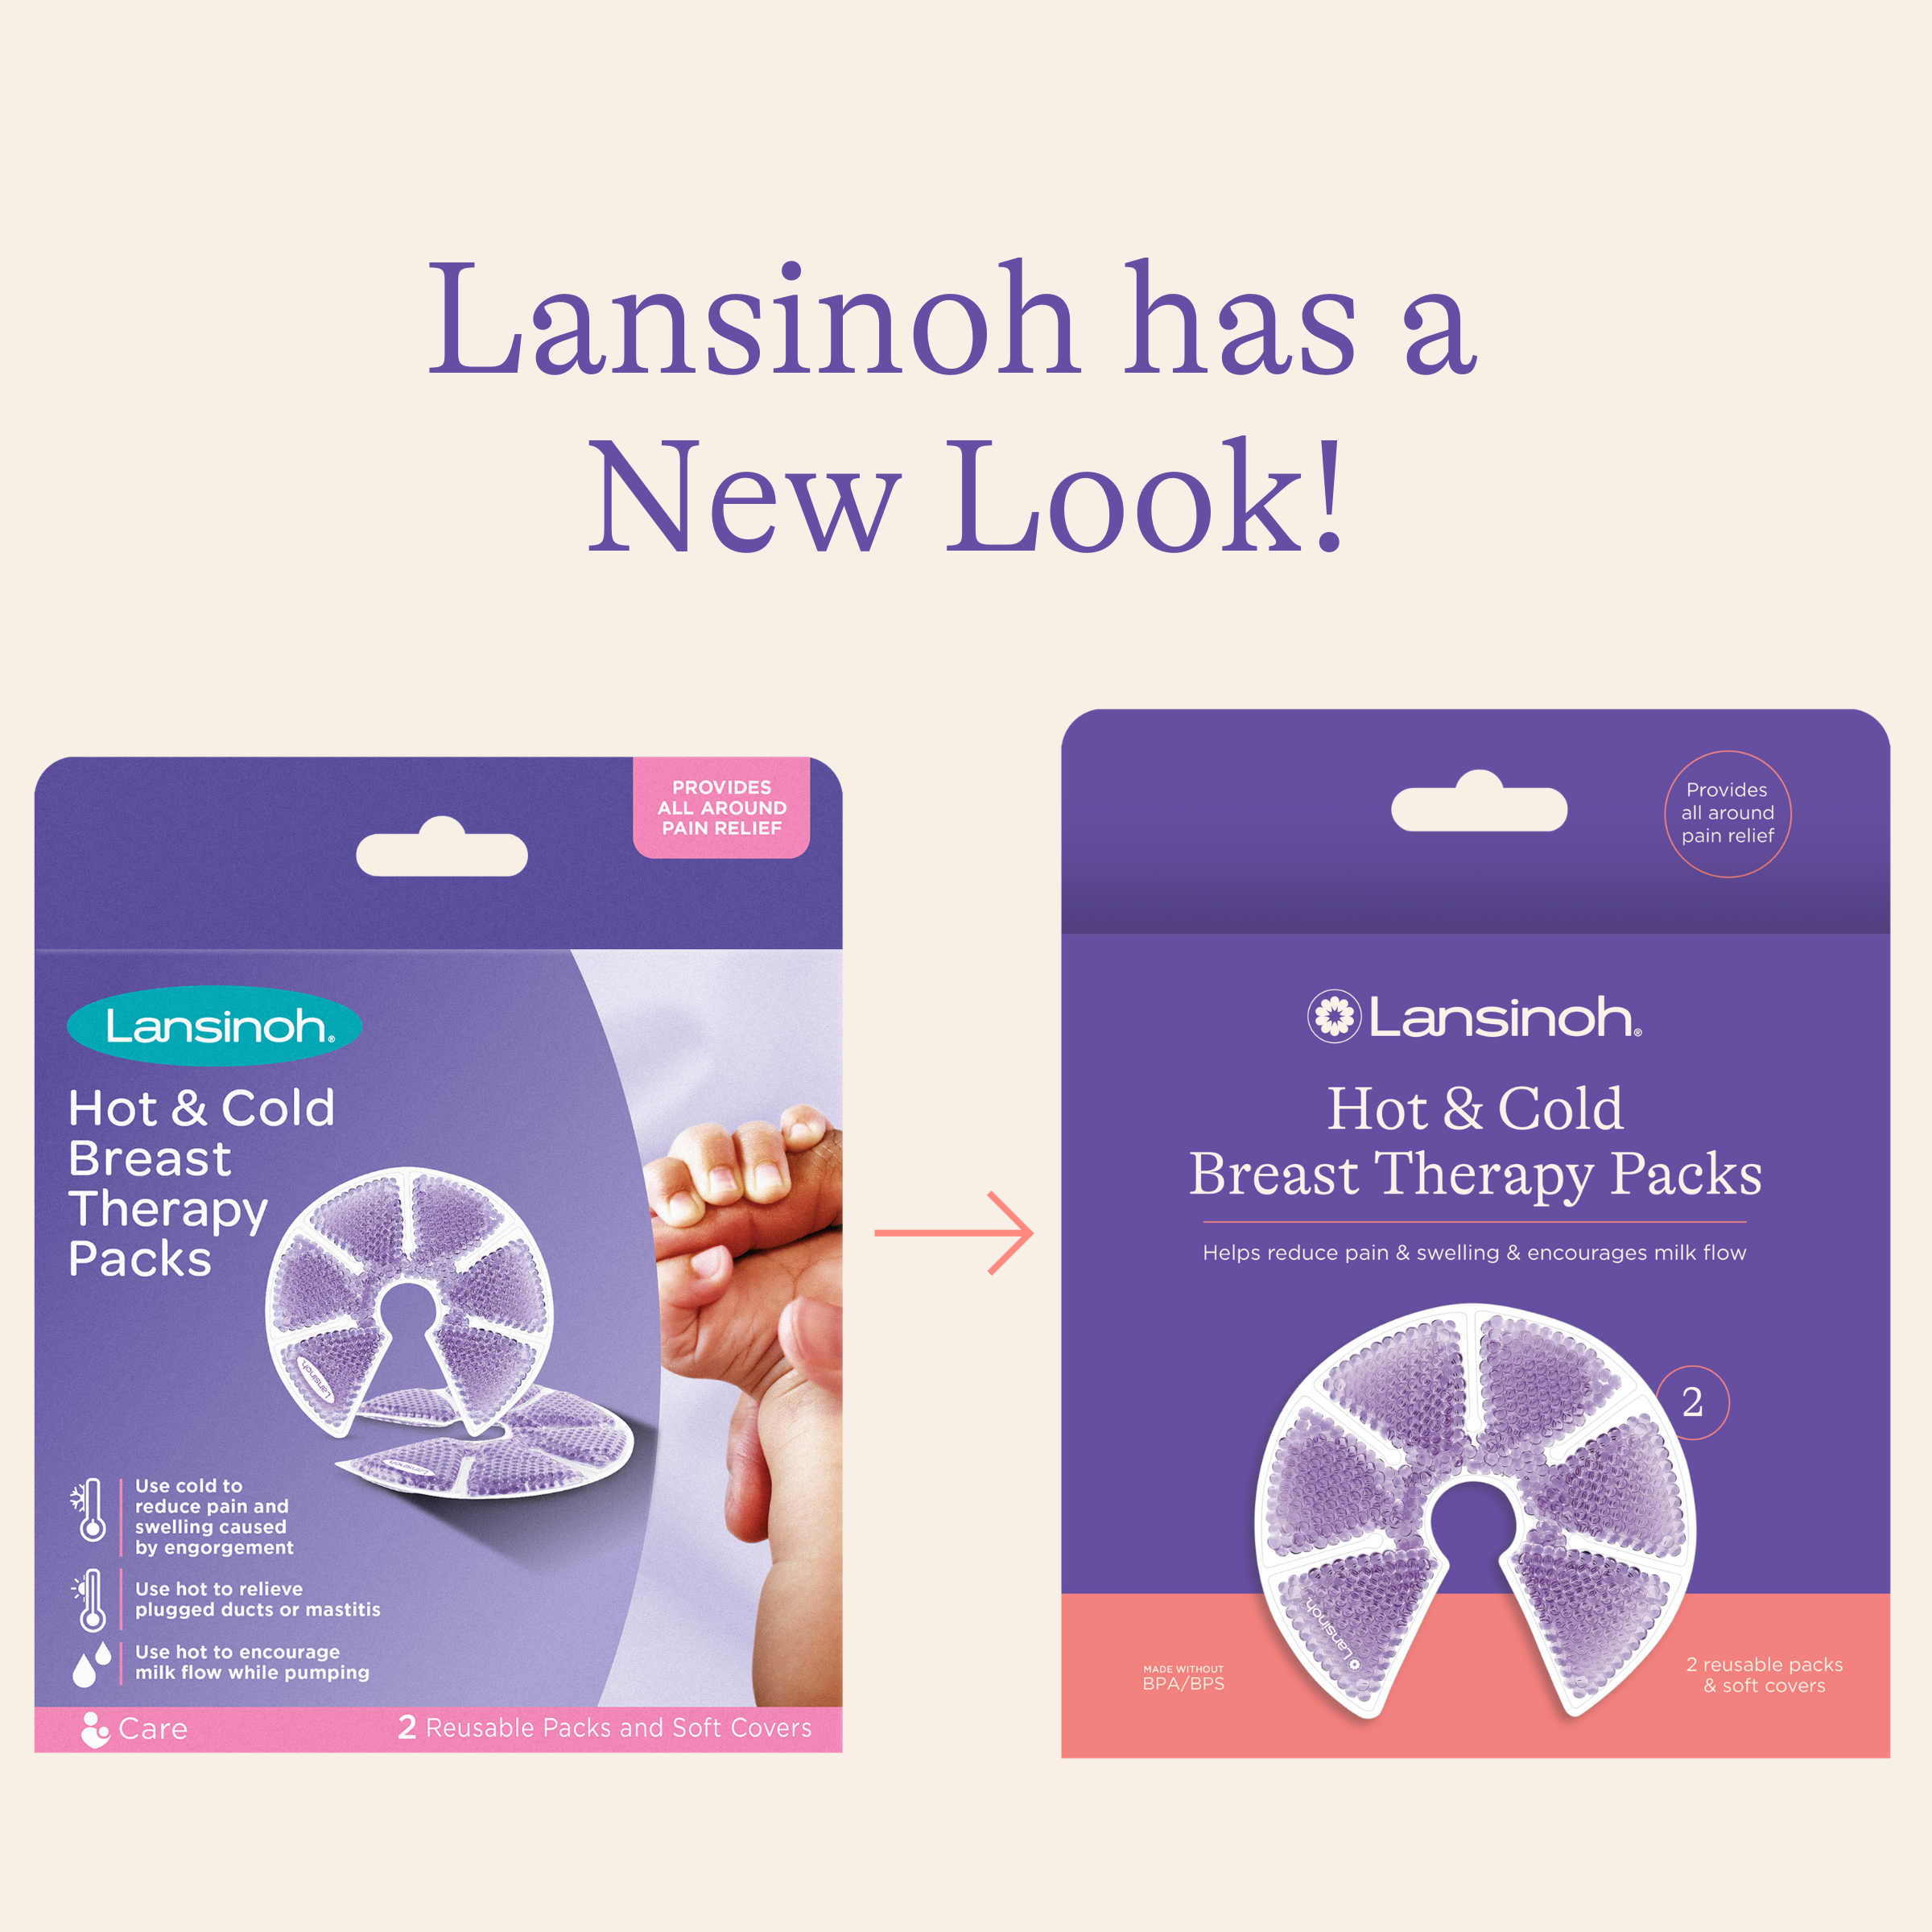 Lansinoh Hot & Cold Breast Therapy Packs with Covers, 2 Pack - image 3 of 13